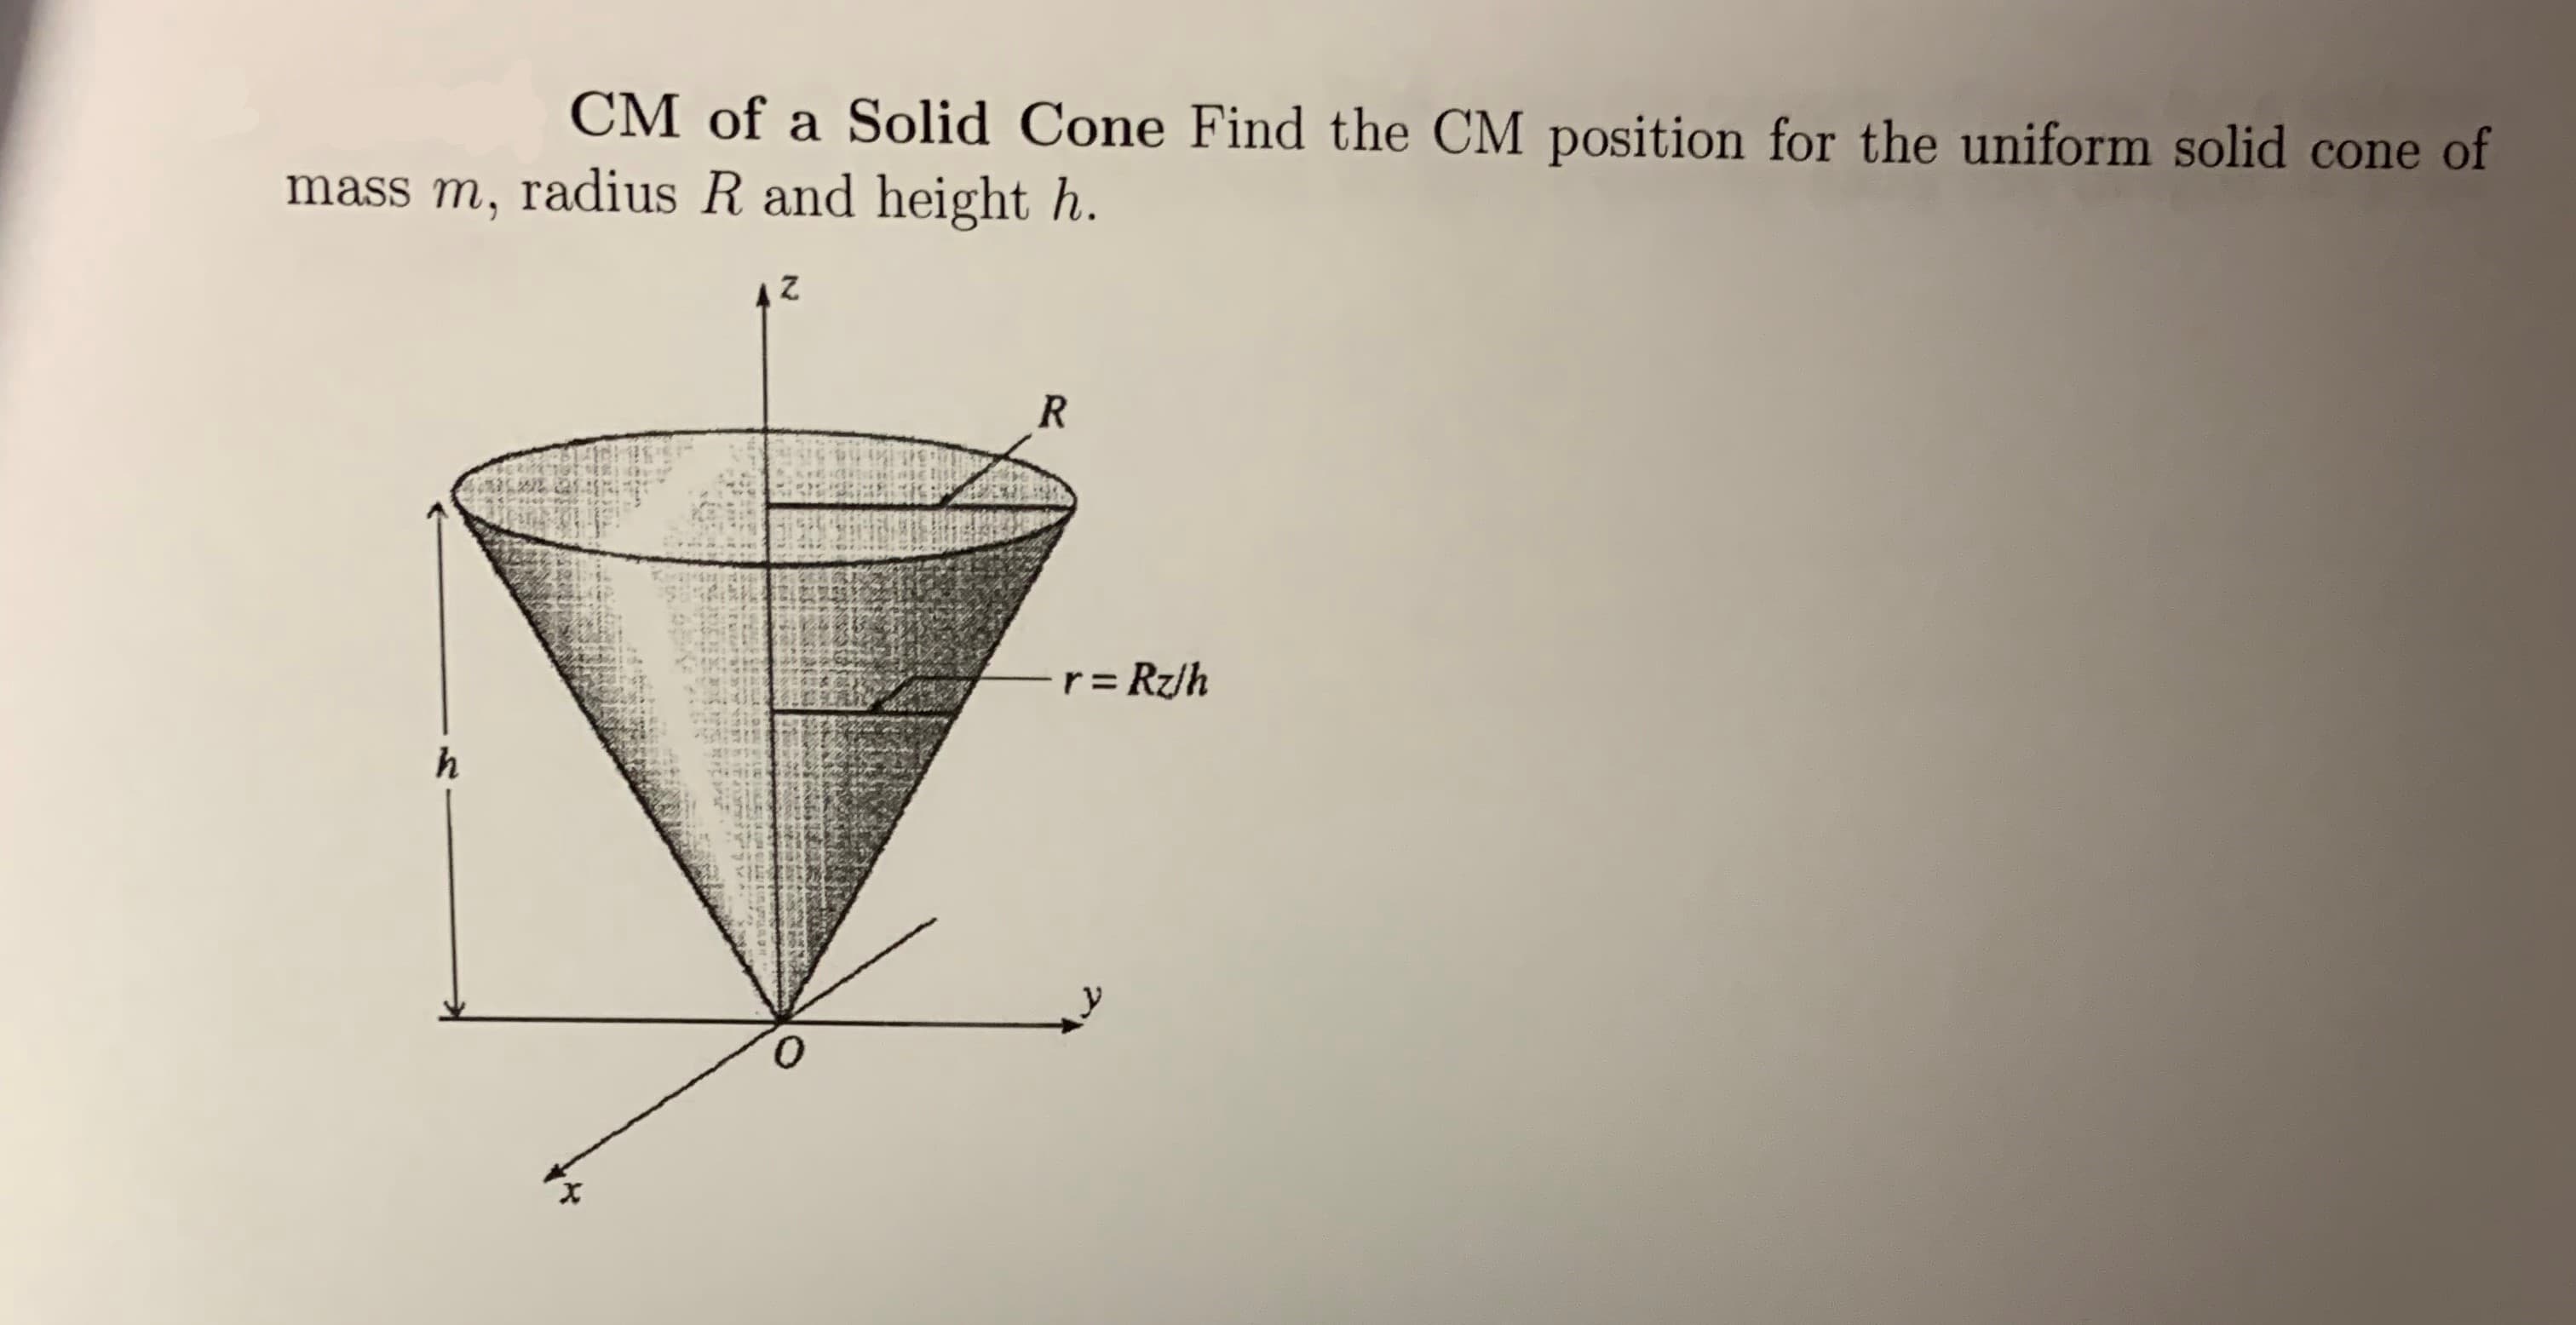 CM of a Solid Cone Find the CM position for the uniform solid cone of
mass m, radius R and height h
A Z
R
r=Rz/h
h
